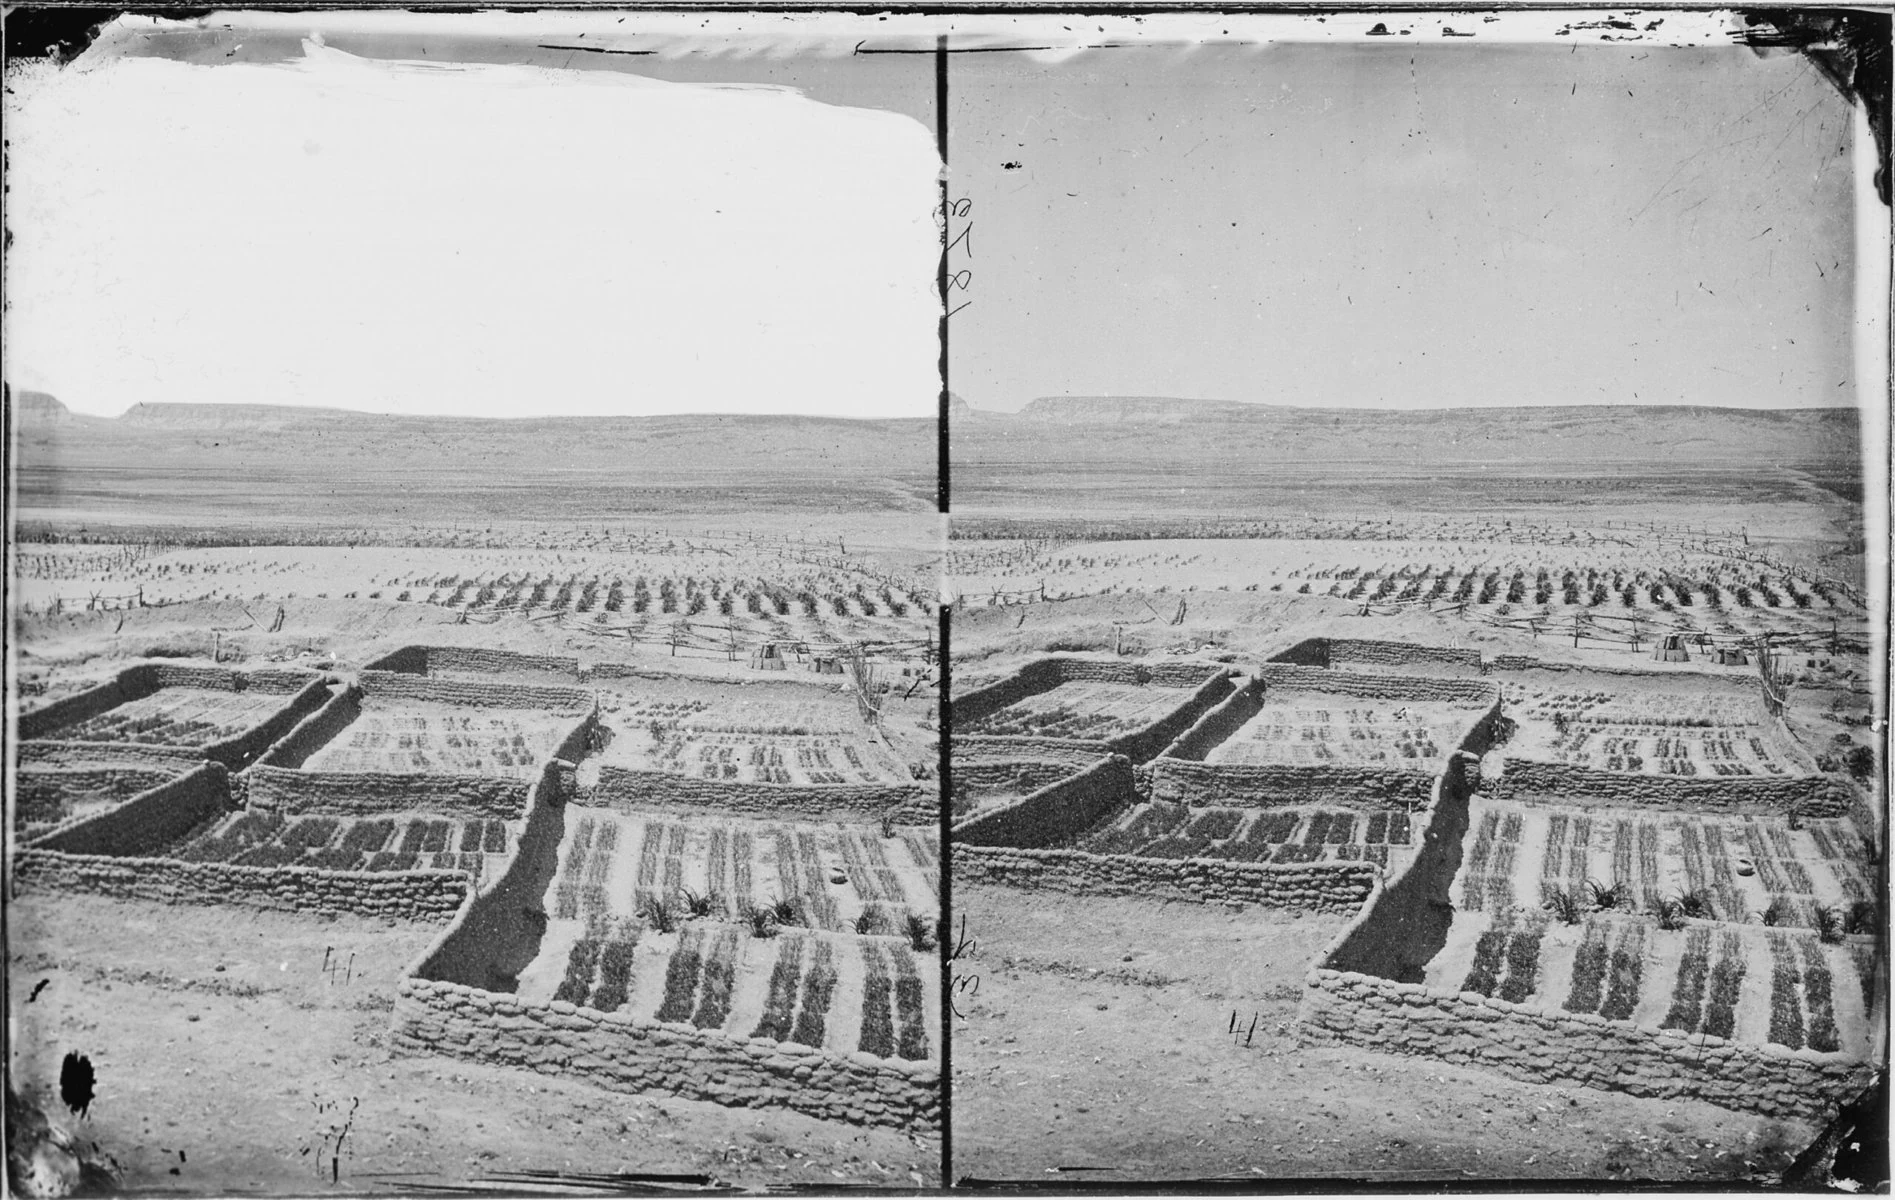 Two black and white images of Zuni vegetable gardens in 1873.